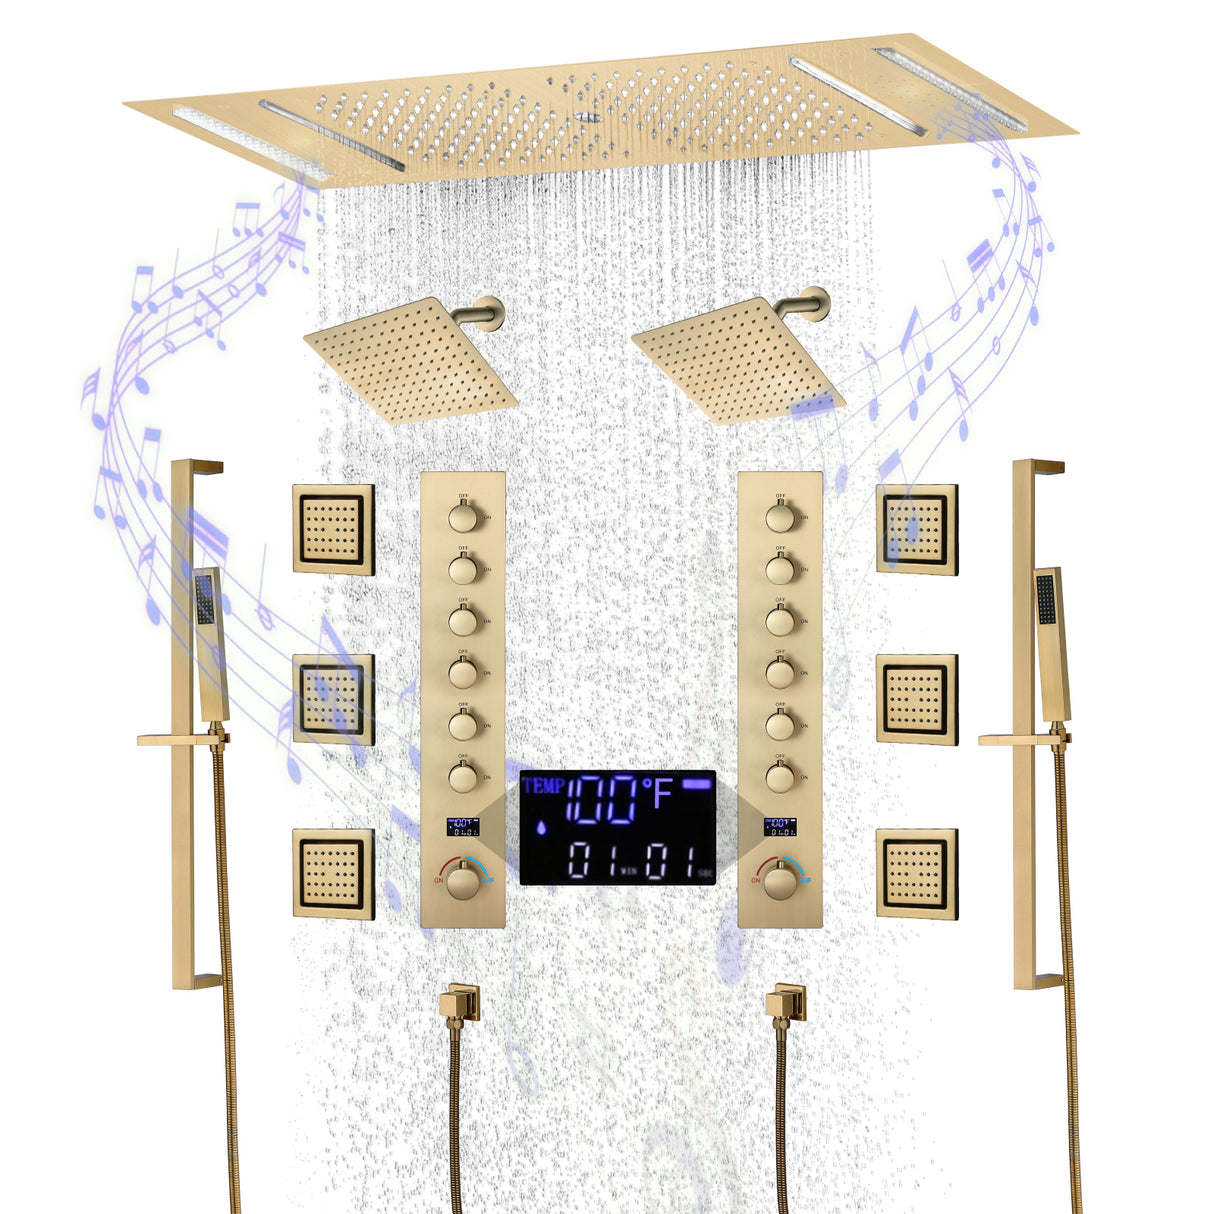 Fuse | 36" In Dual Showerhead Complete Led Music Shower Set 6 Body Jets 2x Wall Mounted Rainfall Showerhead